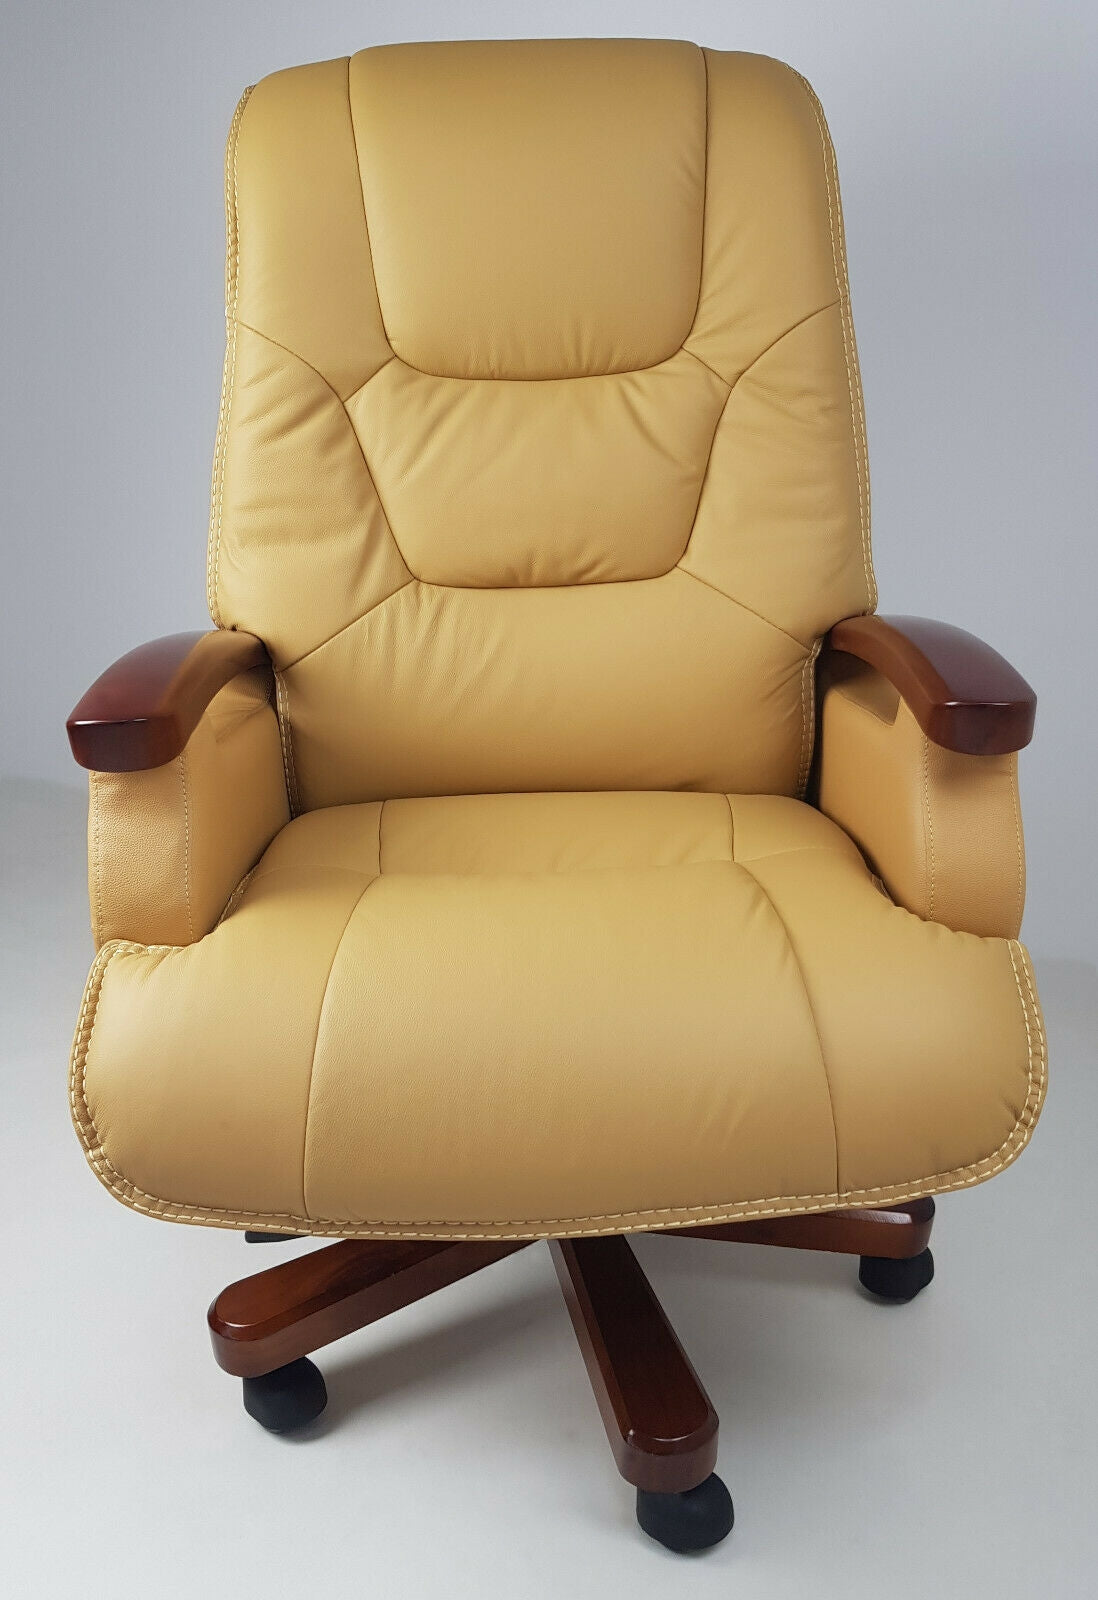 Luxury Beige Leather Executive Office Chair - A302